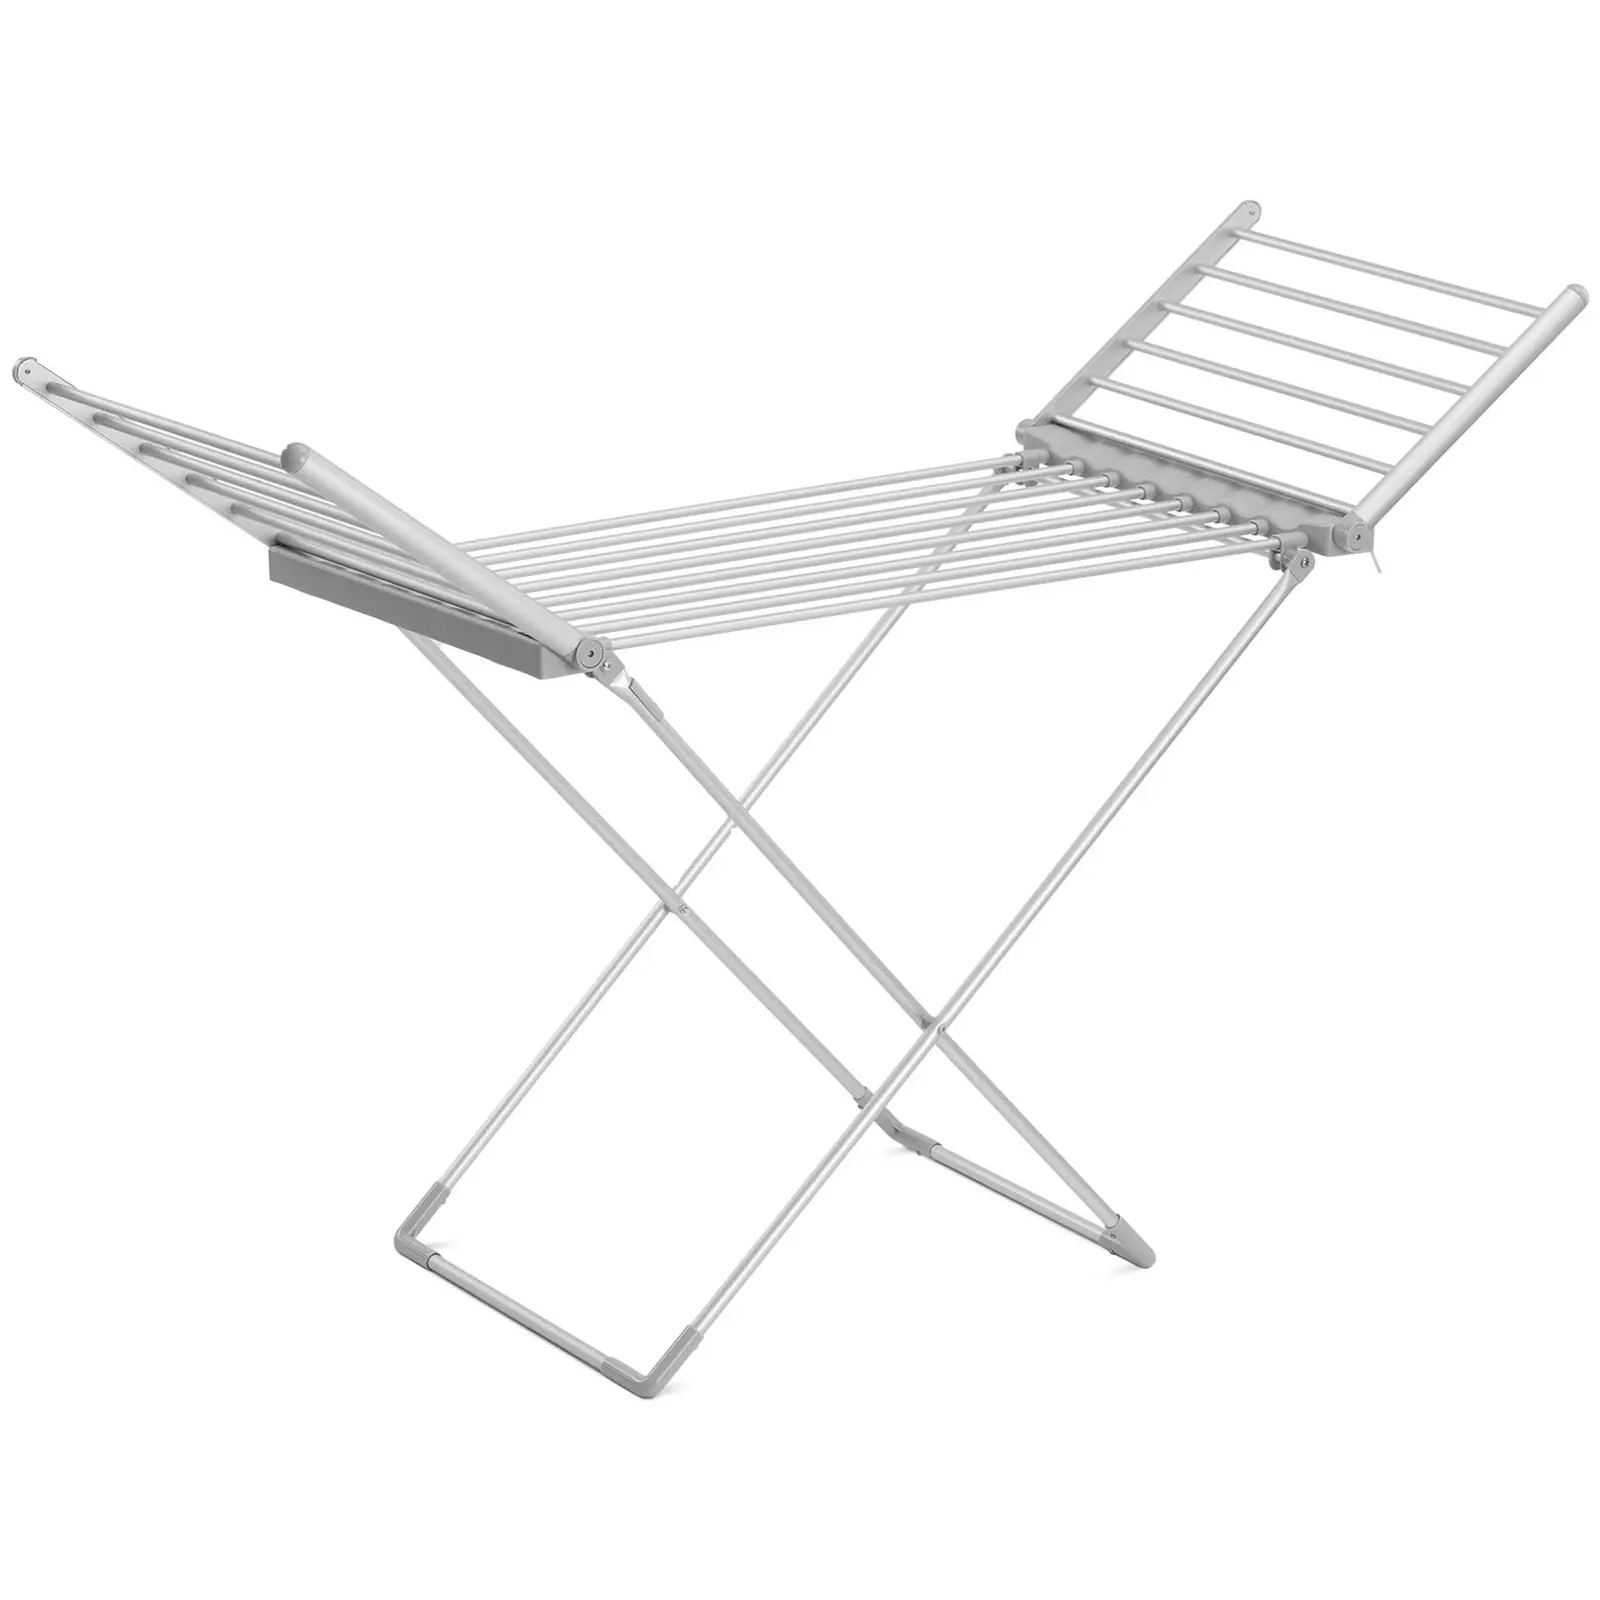 Heated Clothes Airer - 20 heating rods - foldable